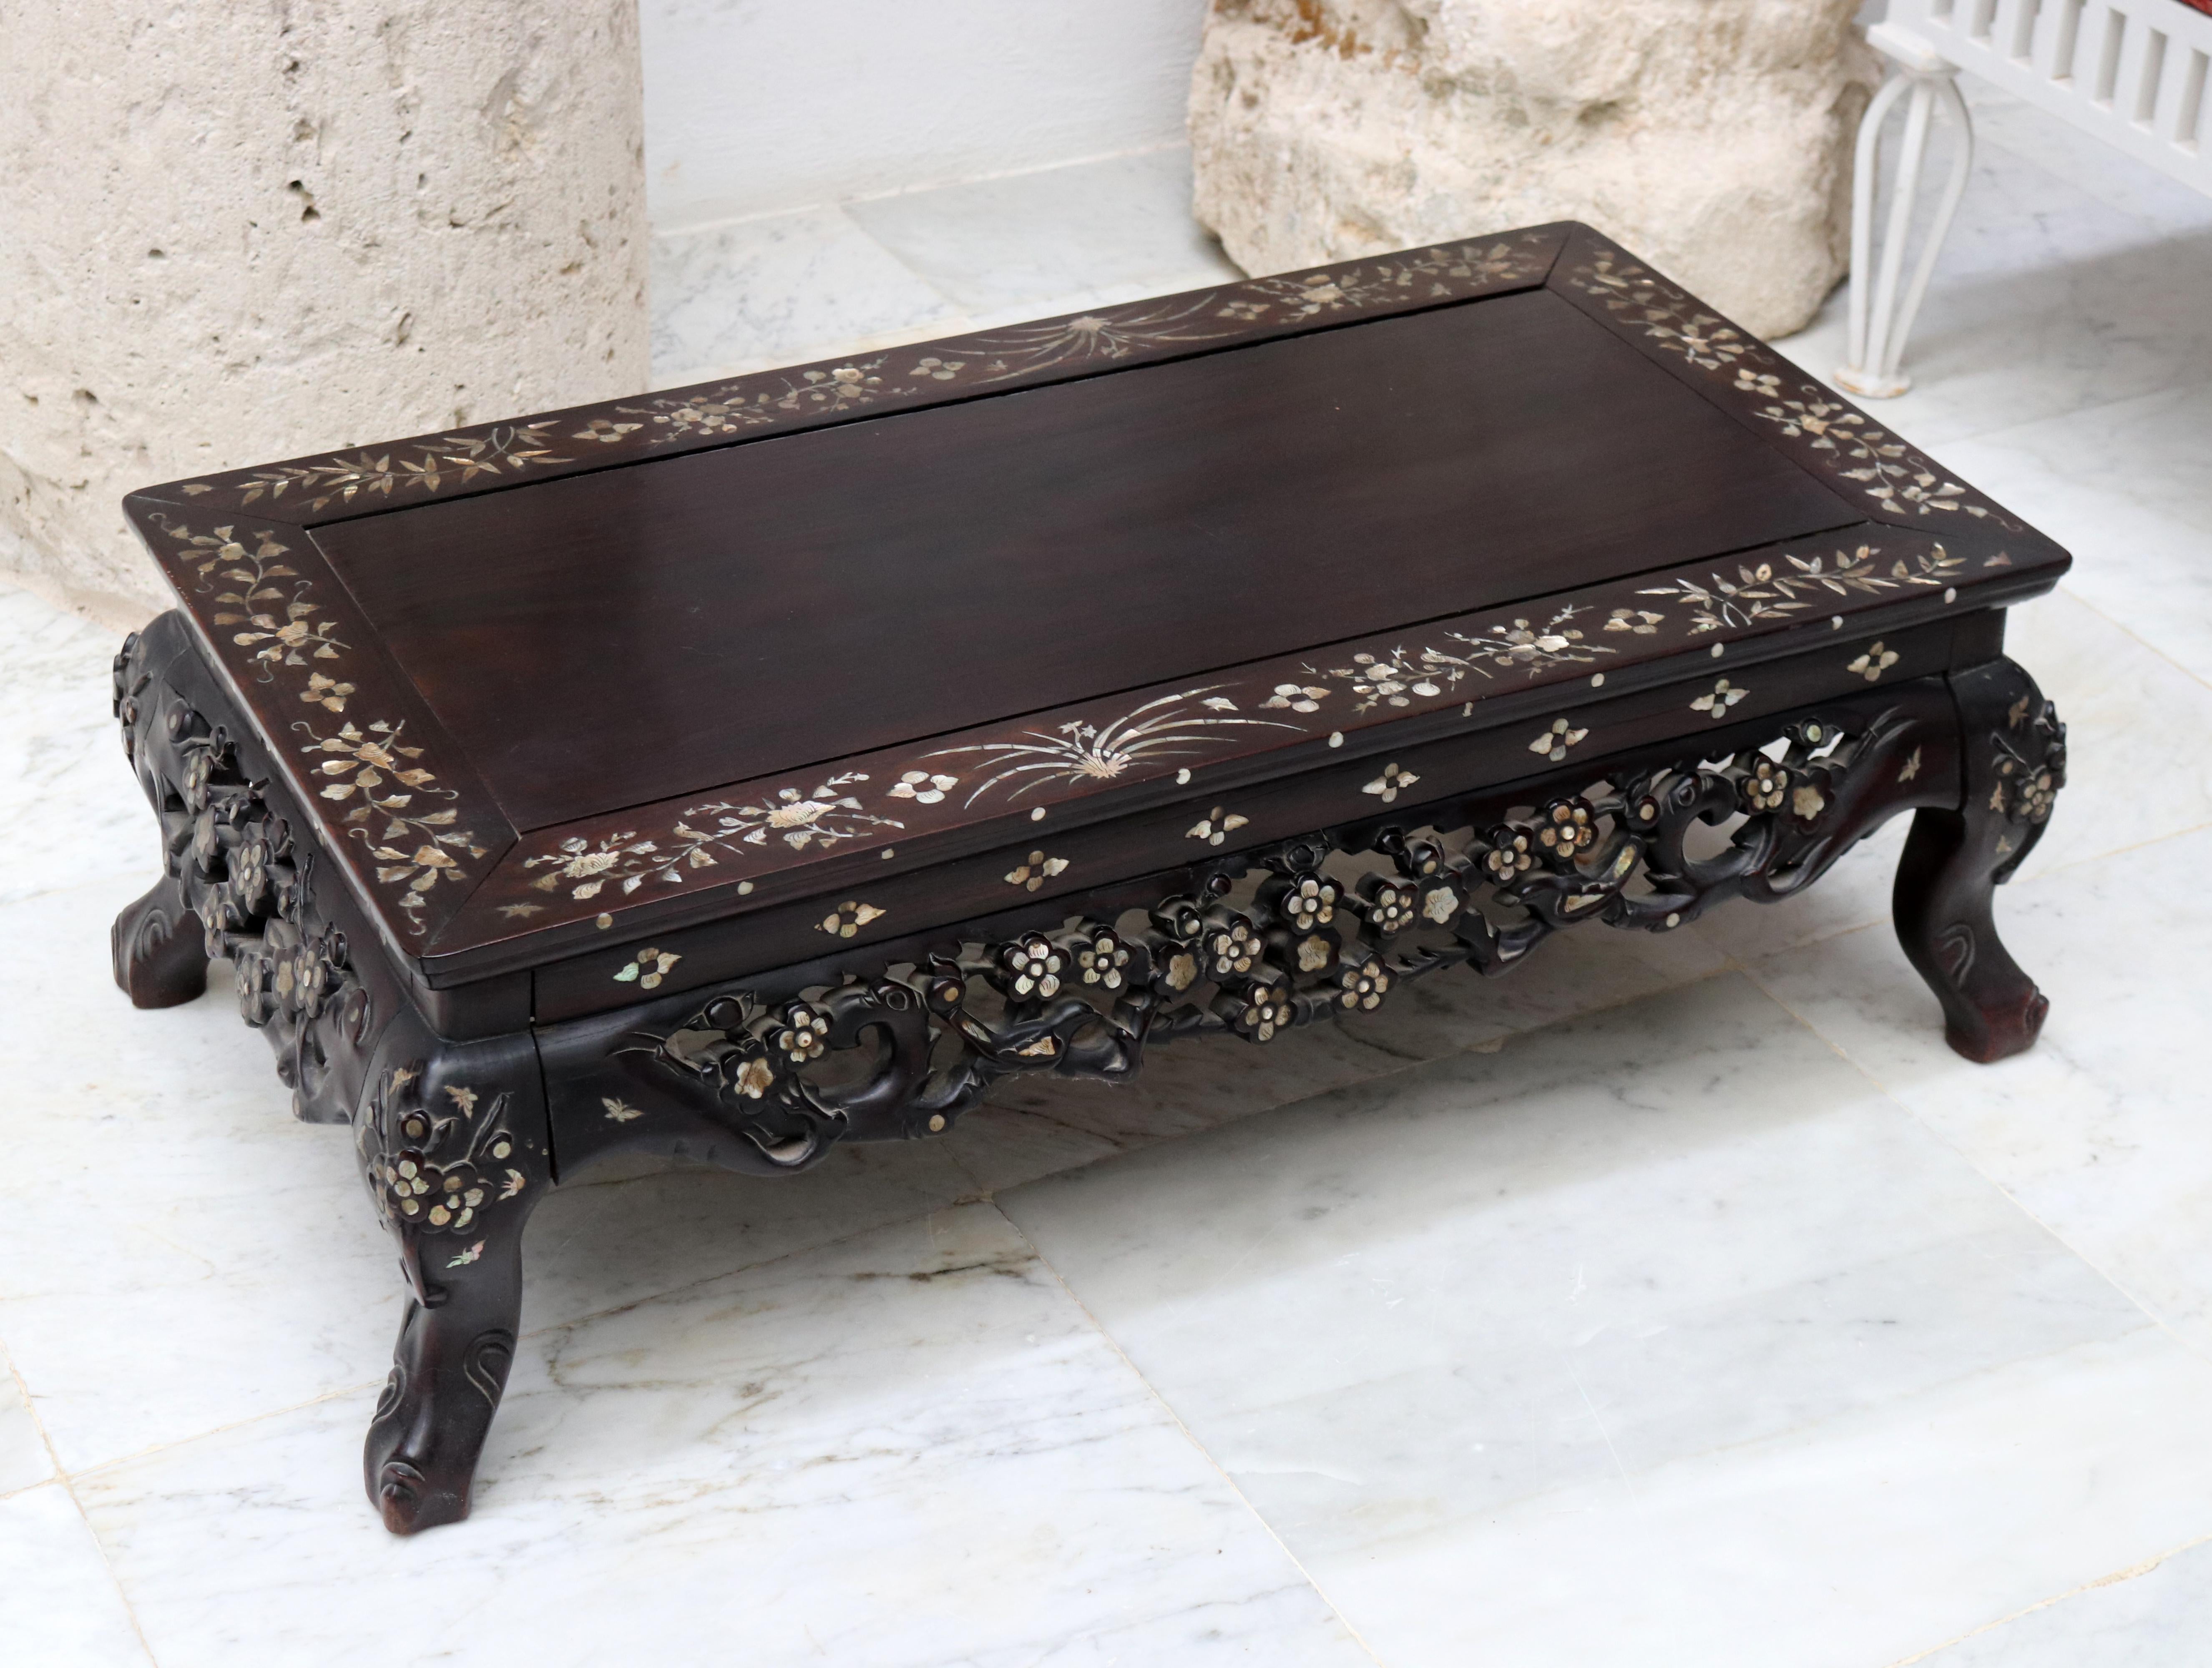 19th century hand carved Chinese rosewood table with mother of pearl inlay.